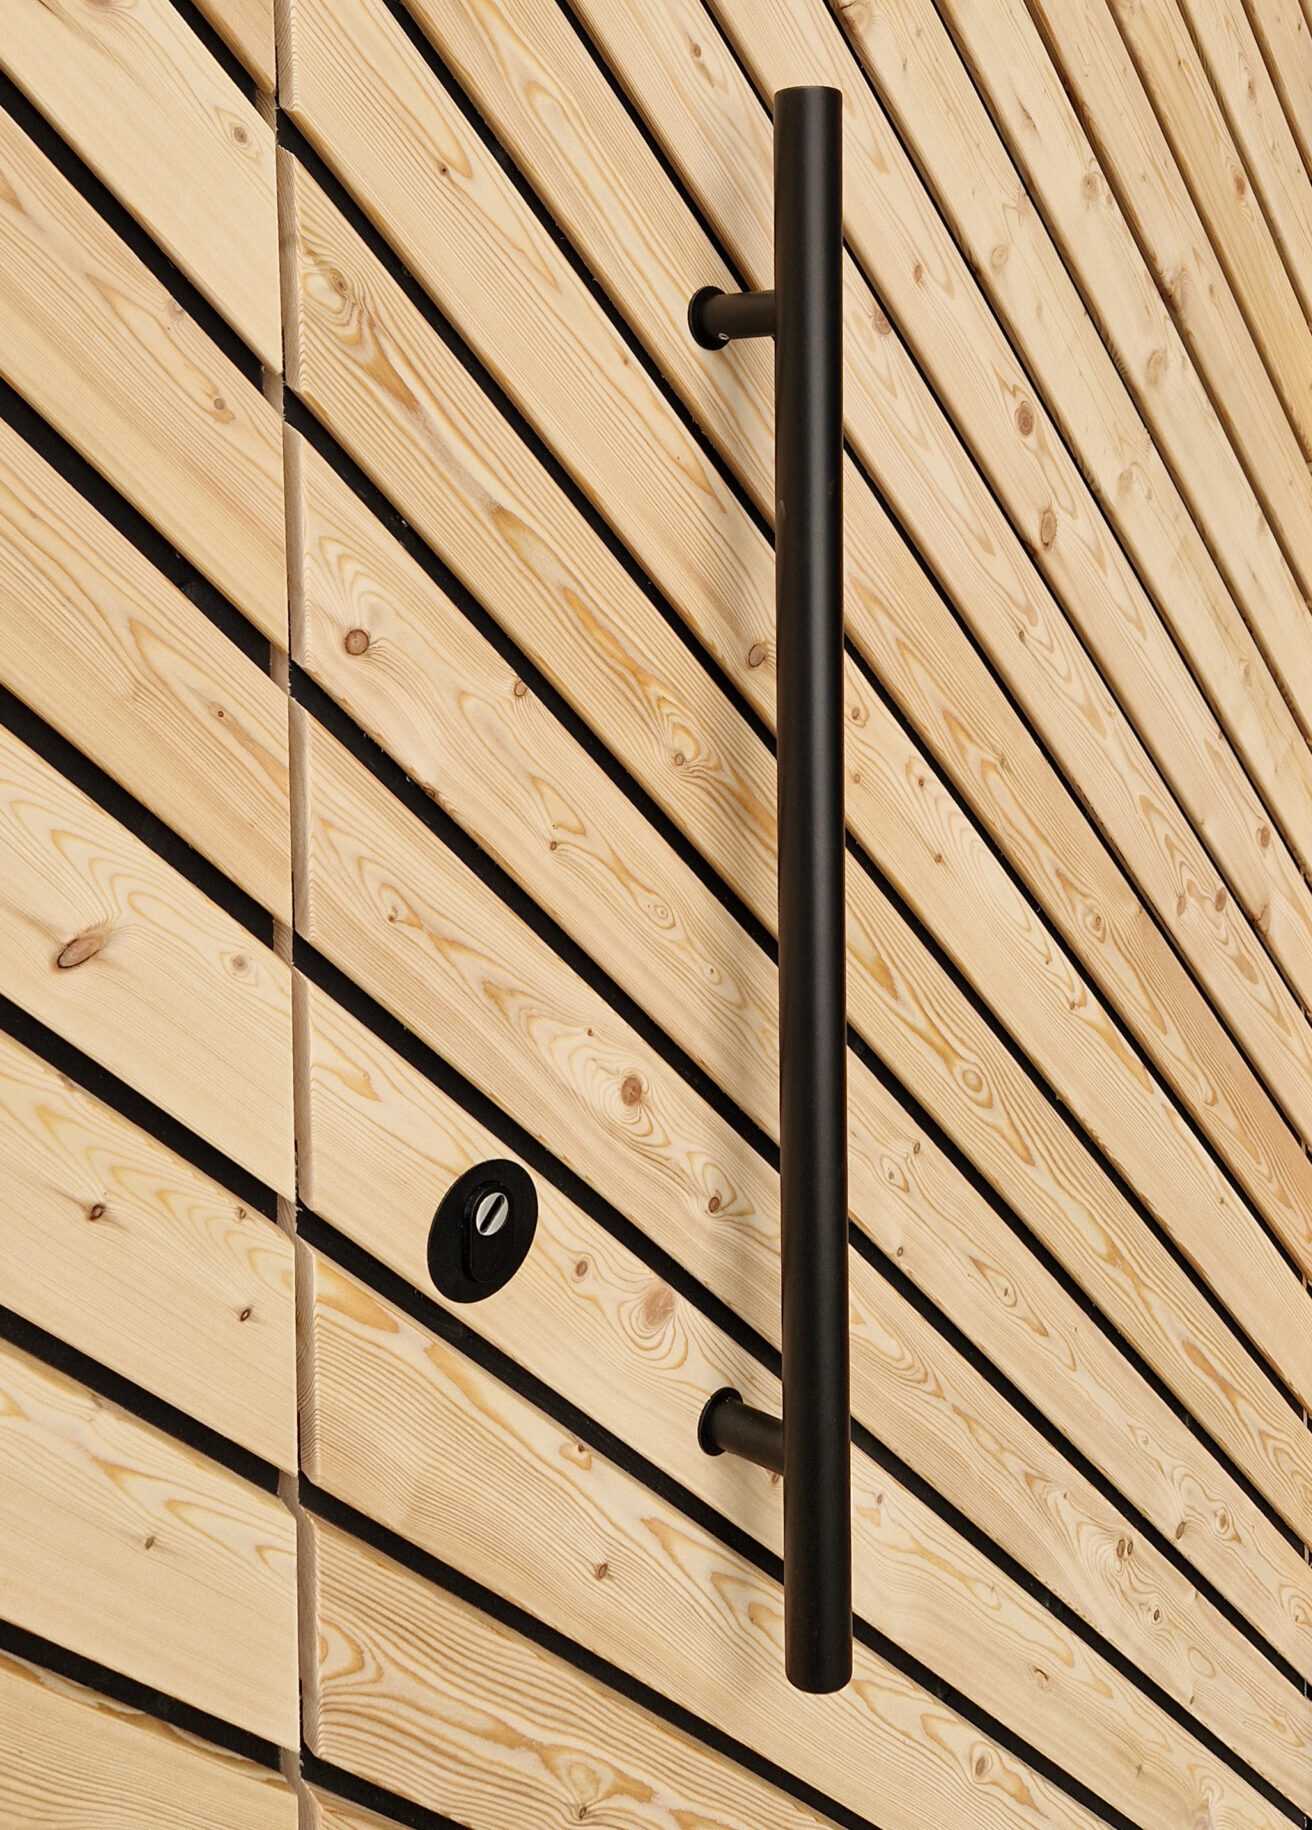 Black handle on concealed door with angled wooden slats